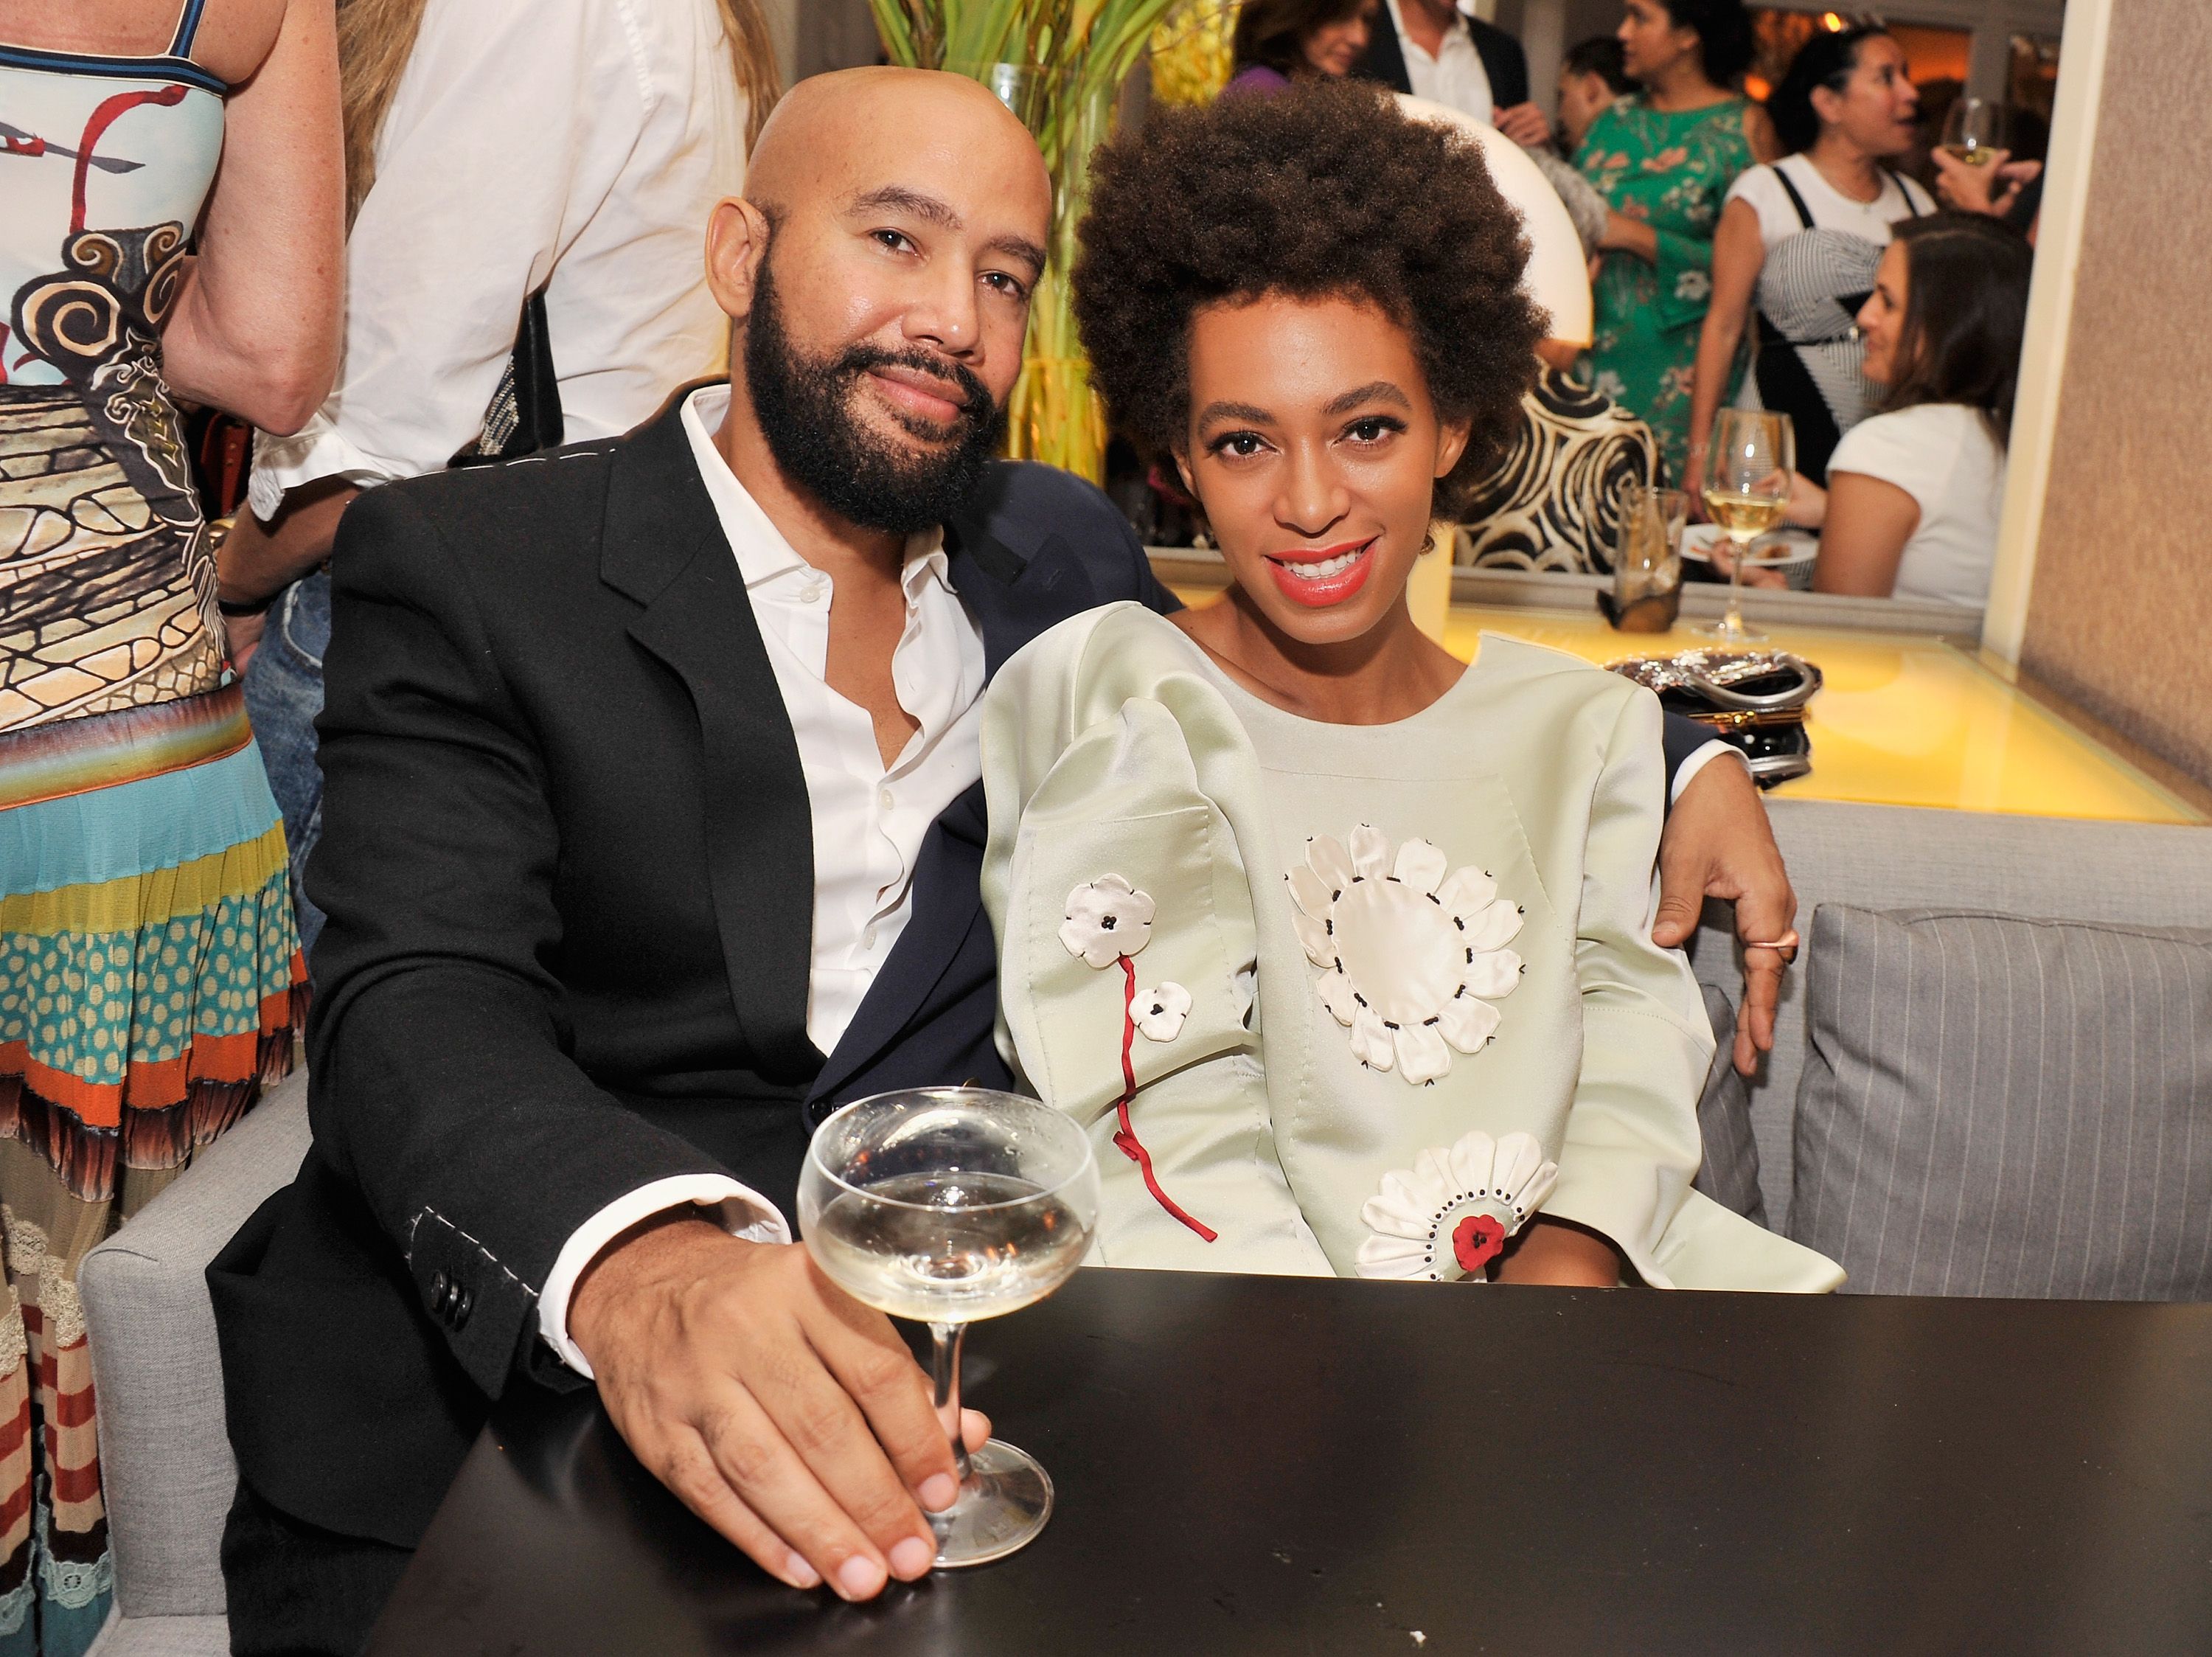 Alan Ferguson and Solange Knowles during the after party for the New York Premiere of "Blue Jasmine" at Harlow on July 22, 2013 in New York City. | Source: Getty Images